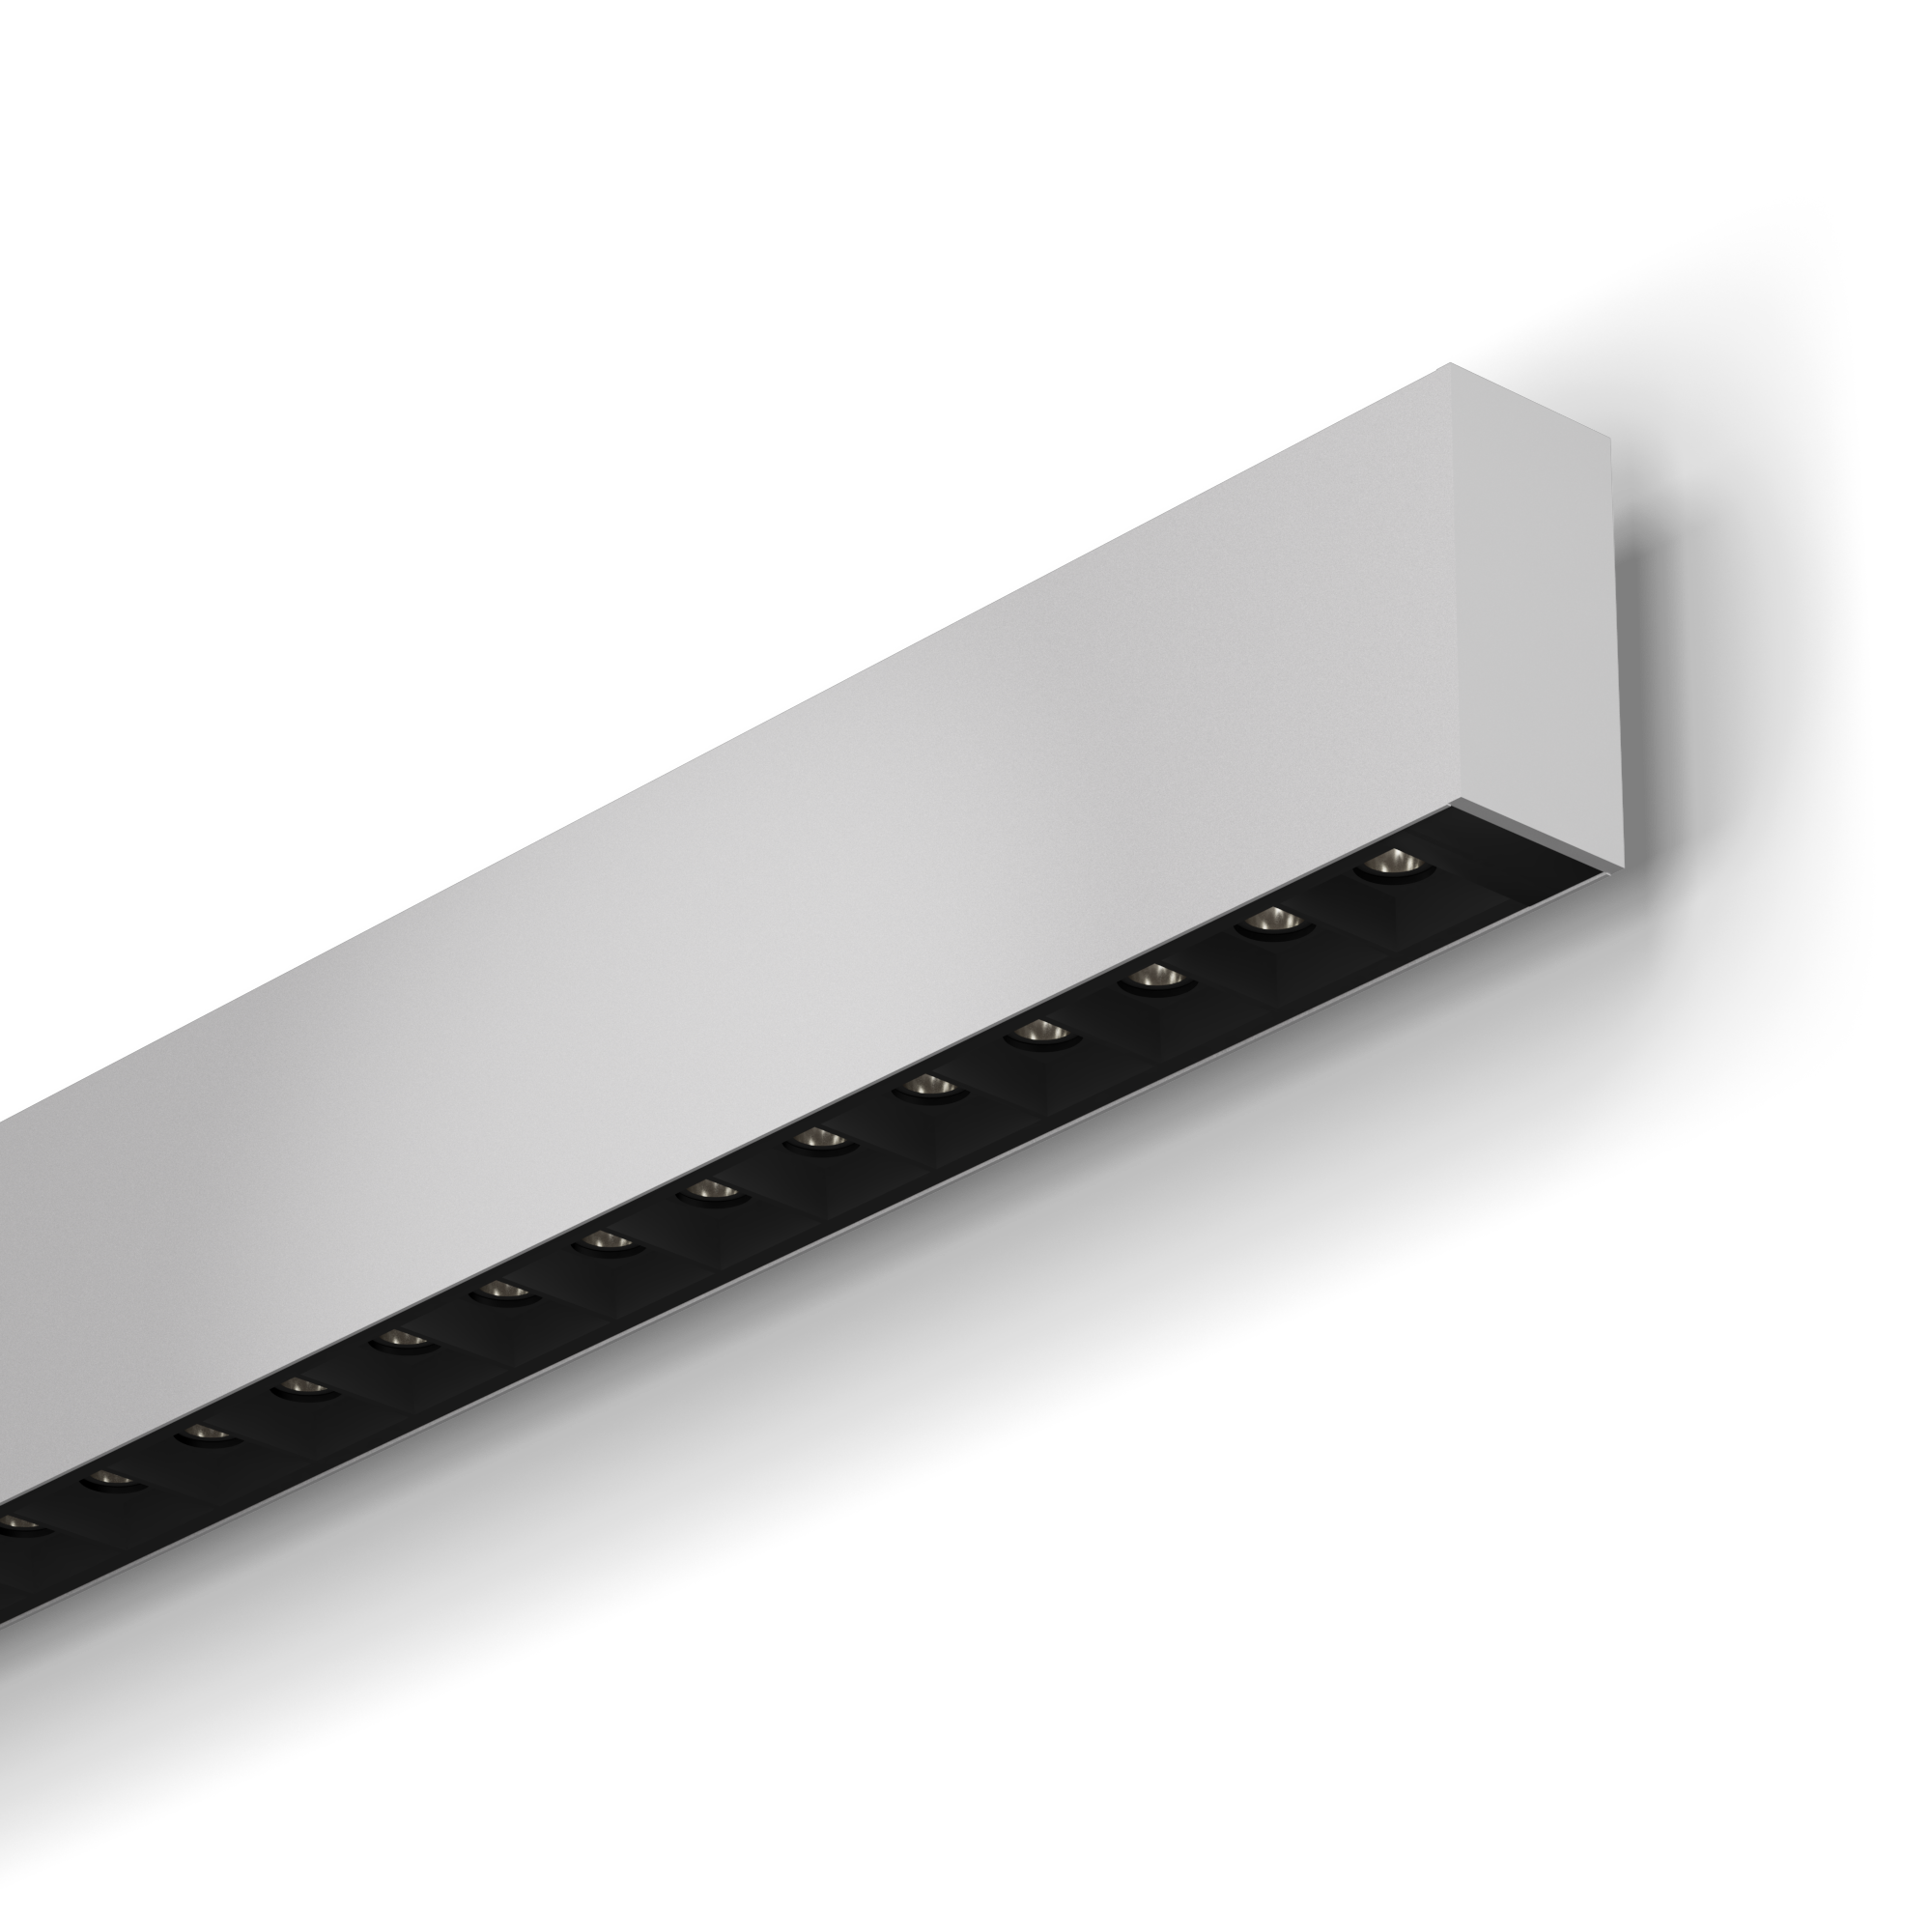 Wall mounted linear with integral on-board driver
MICROBeam MCO Wall is a 1.4” x 2.95” sized linear for surface mounting, typically to a wall ceiling. MICROBeam MCO Wall includes an integral, field serviceable, on-board driver. MICROBeam MCO Wall brings SmartBeam® capabilities up to a powerful 2000 lumens per foot combined direct and indirect. It’s small size designed to compliment architectural space. MICROBeam MCO Wall is fully field serviceable and can be supplied in continuous runs and a variety of visually appealing shapes.
Typical Applications

 	Offices and co-working spaces
 	Schools, colleges and universities
 	Retail spaces